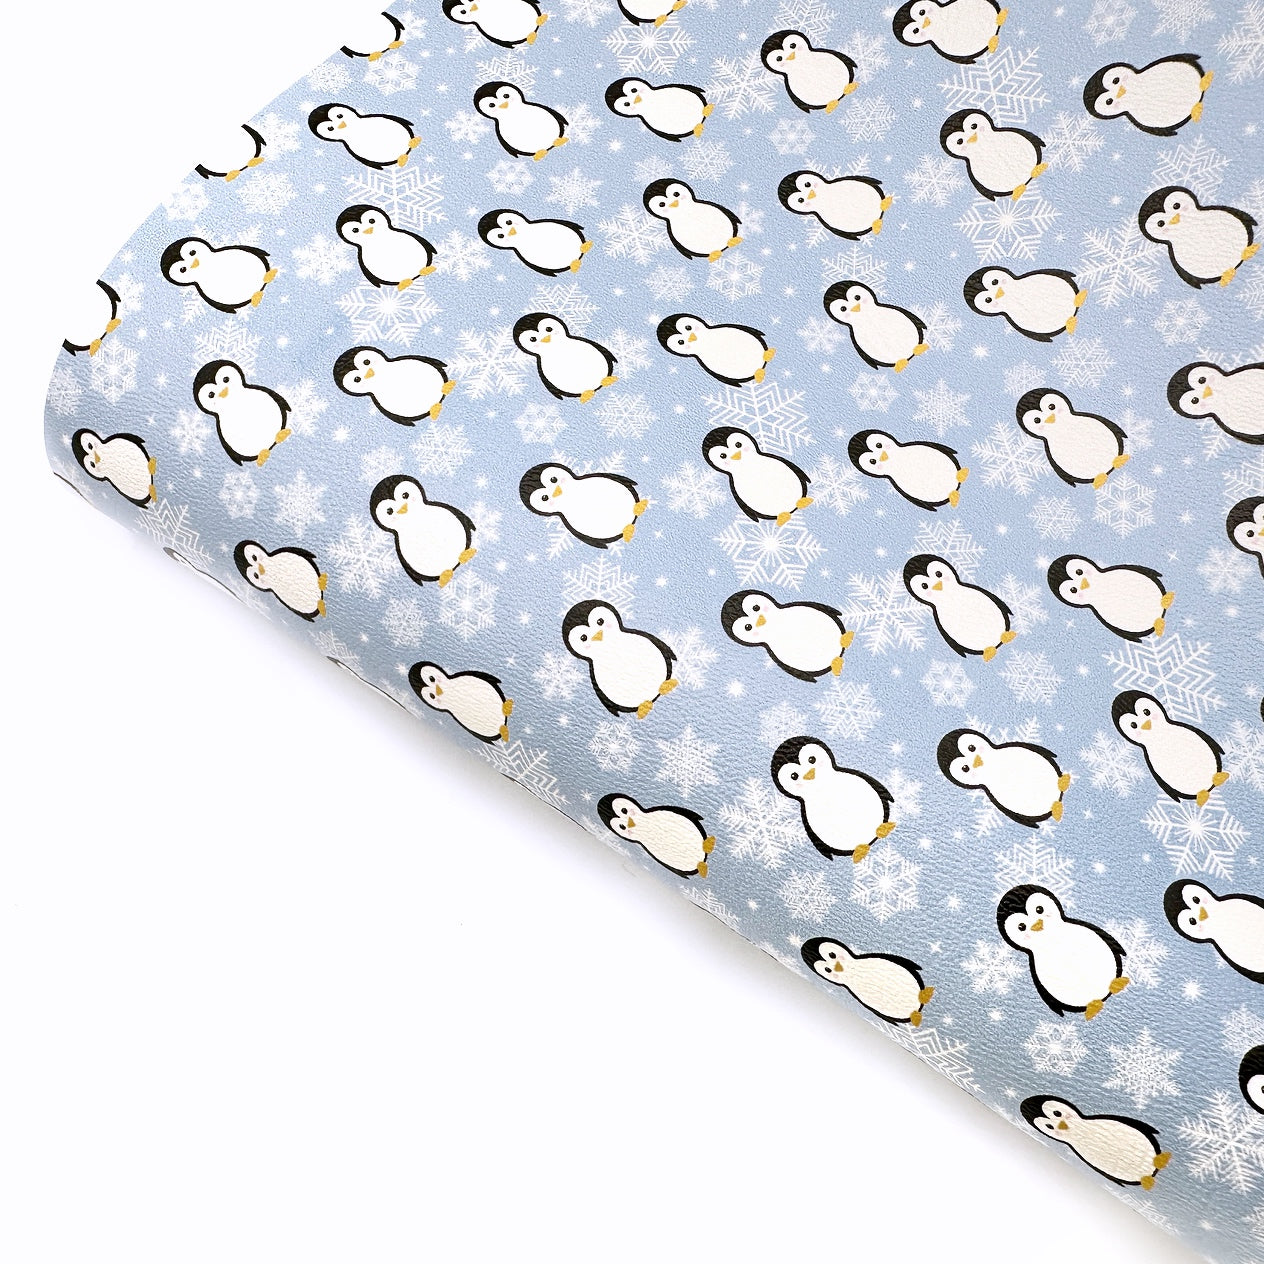 Frosty Penguins Premium Faux Leather Fabric Sheets